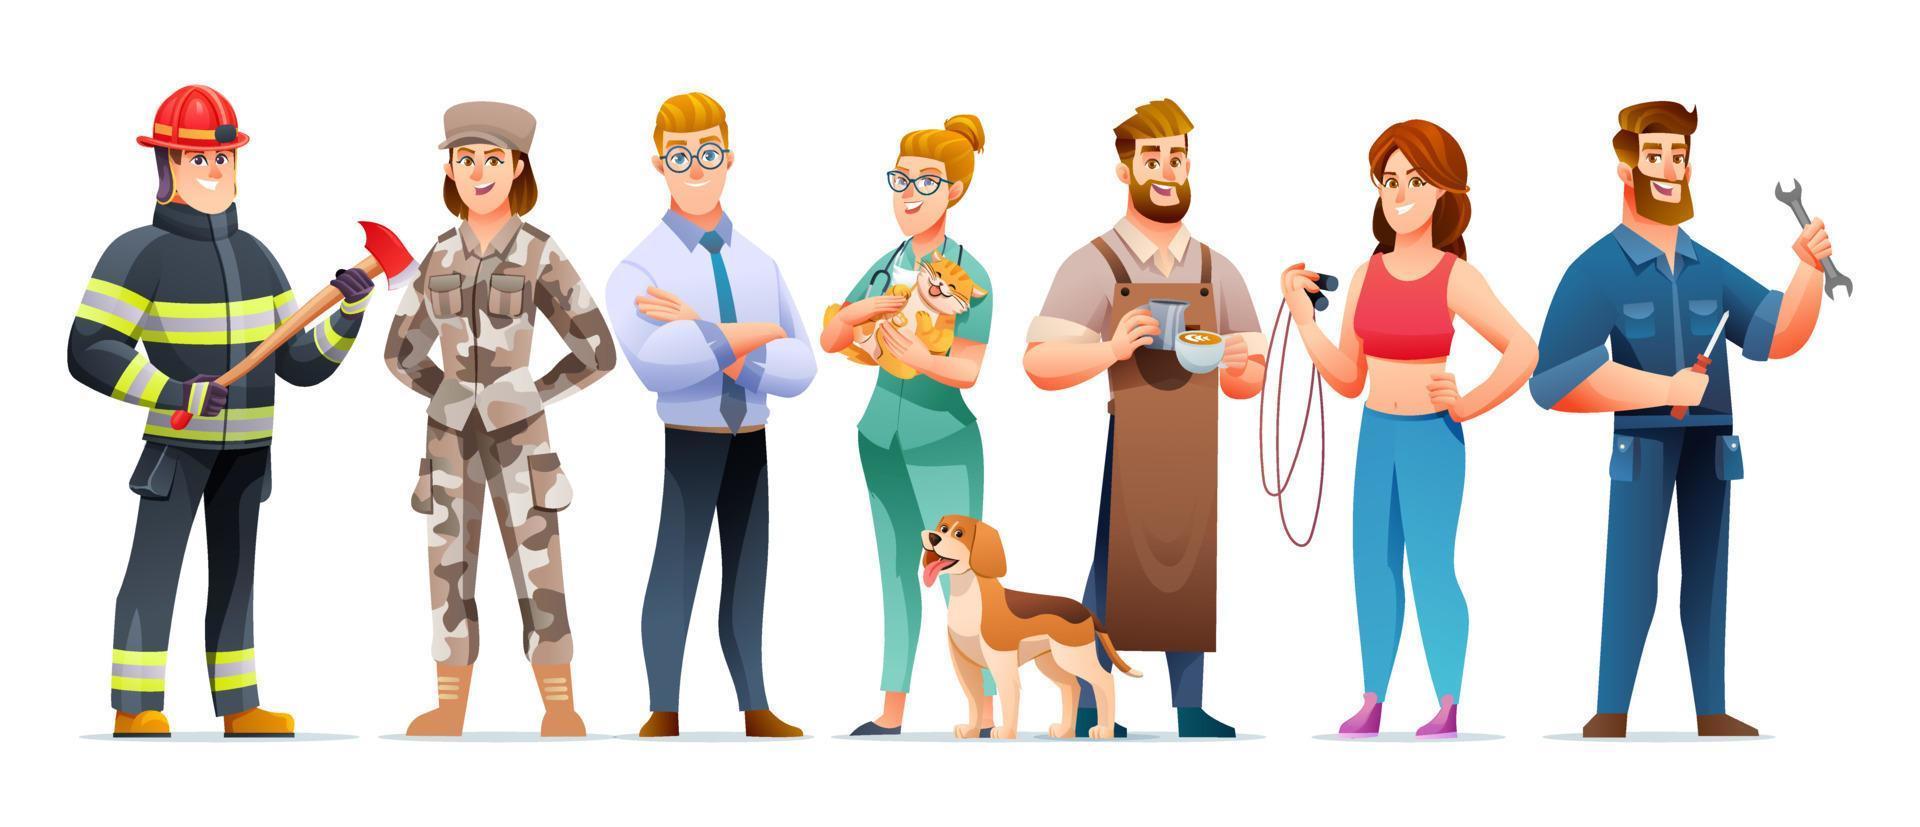 Different people profession character set in cartoon style vector